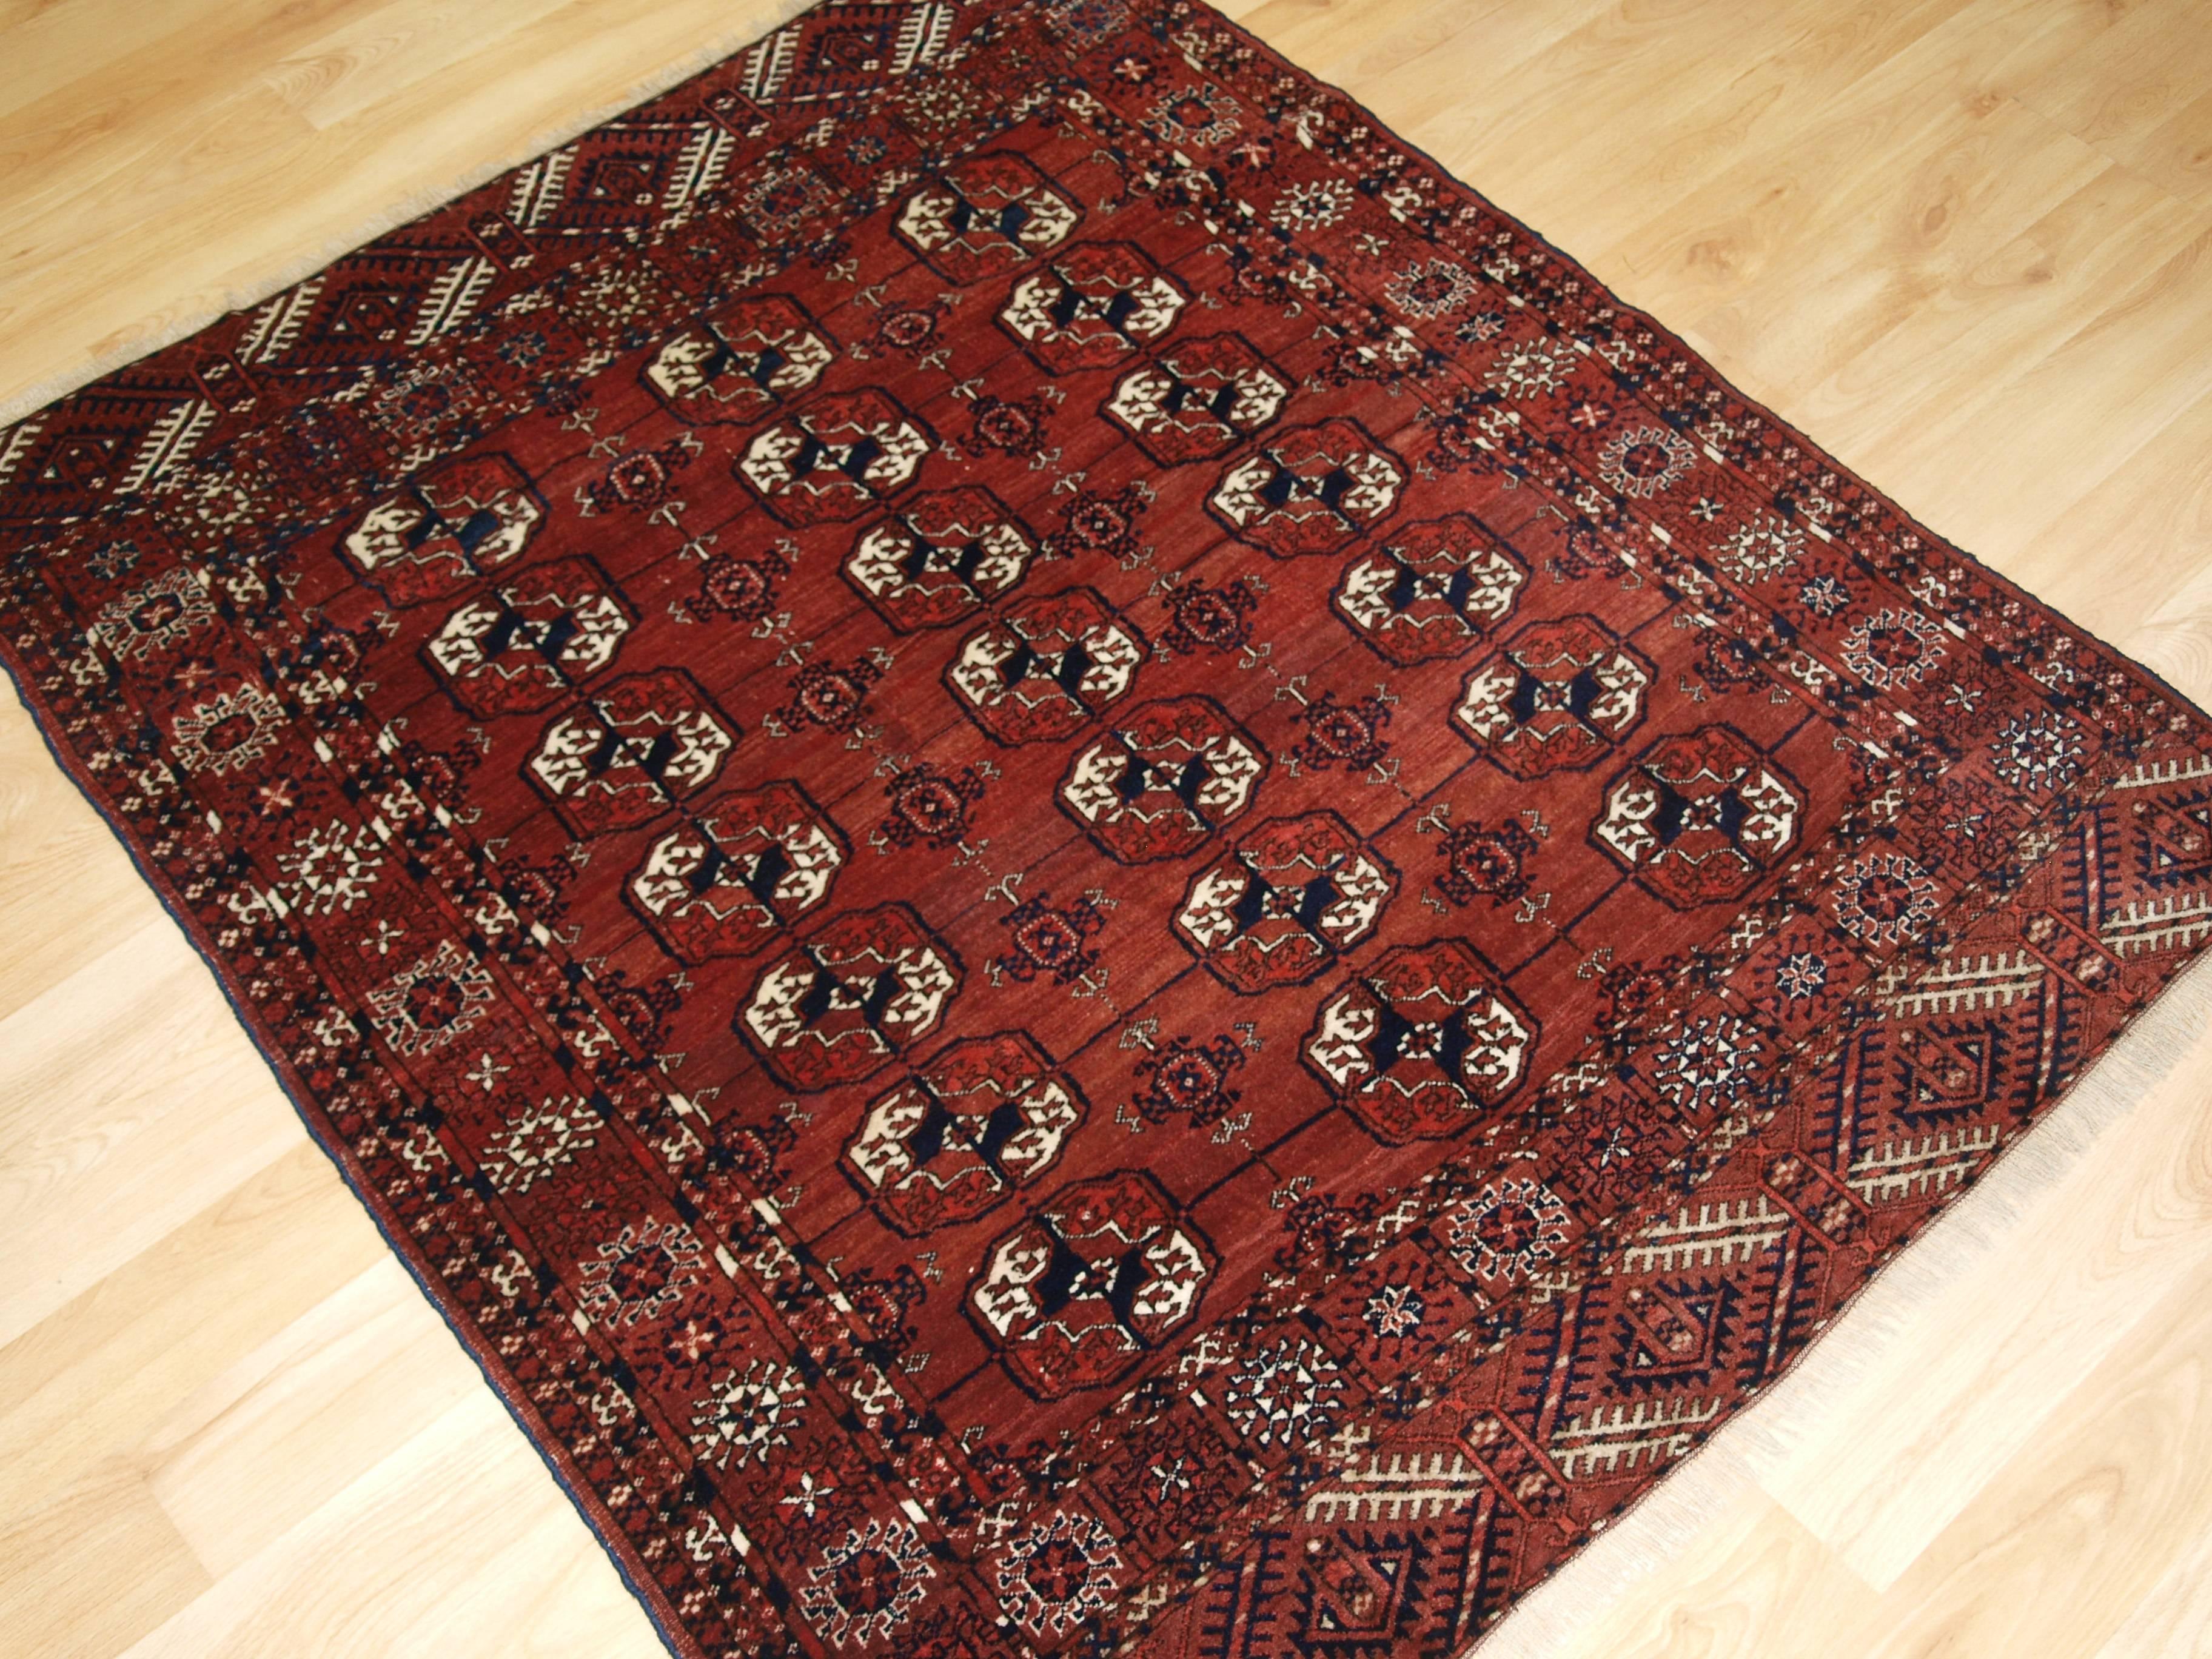 Antique Tekke Turkmen rug, small size with superb color and velvet like feel, circa 1900
Size: 4ft 3in x 3ft 7in (130 x 109cm).

Antique Tekke Turkmen rug of excellent design and color, the rug is of a rich red/brown color,

  

The rug has a